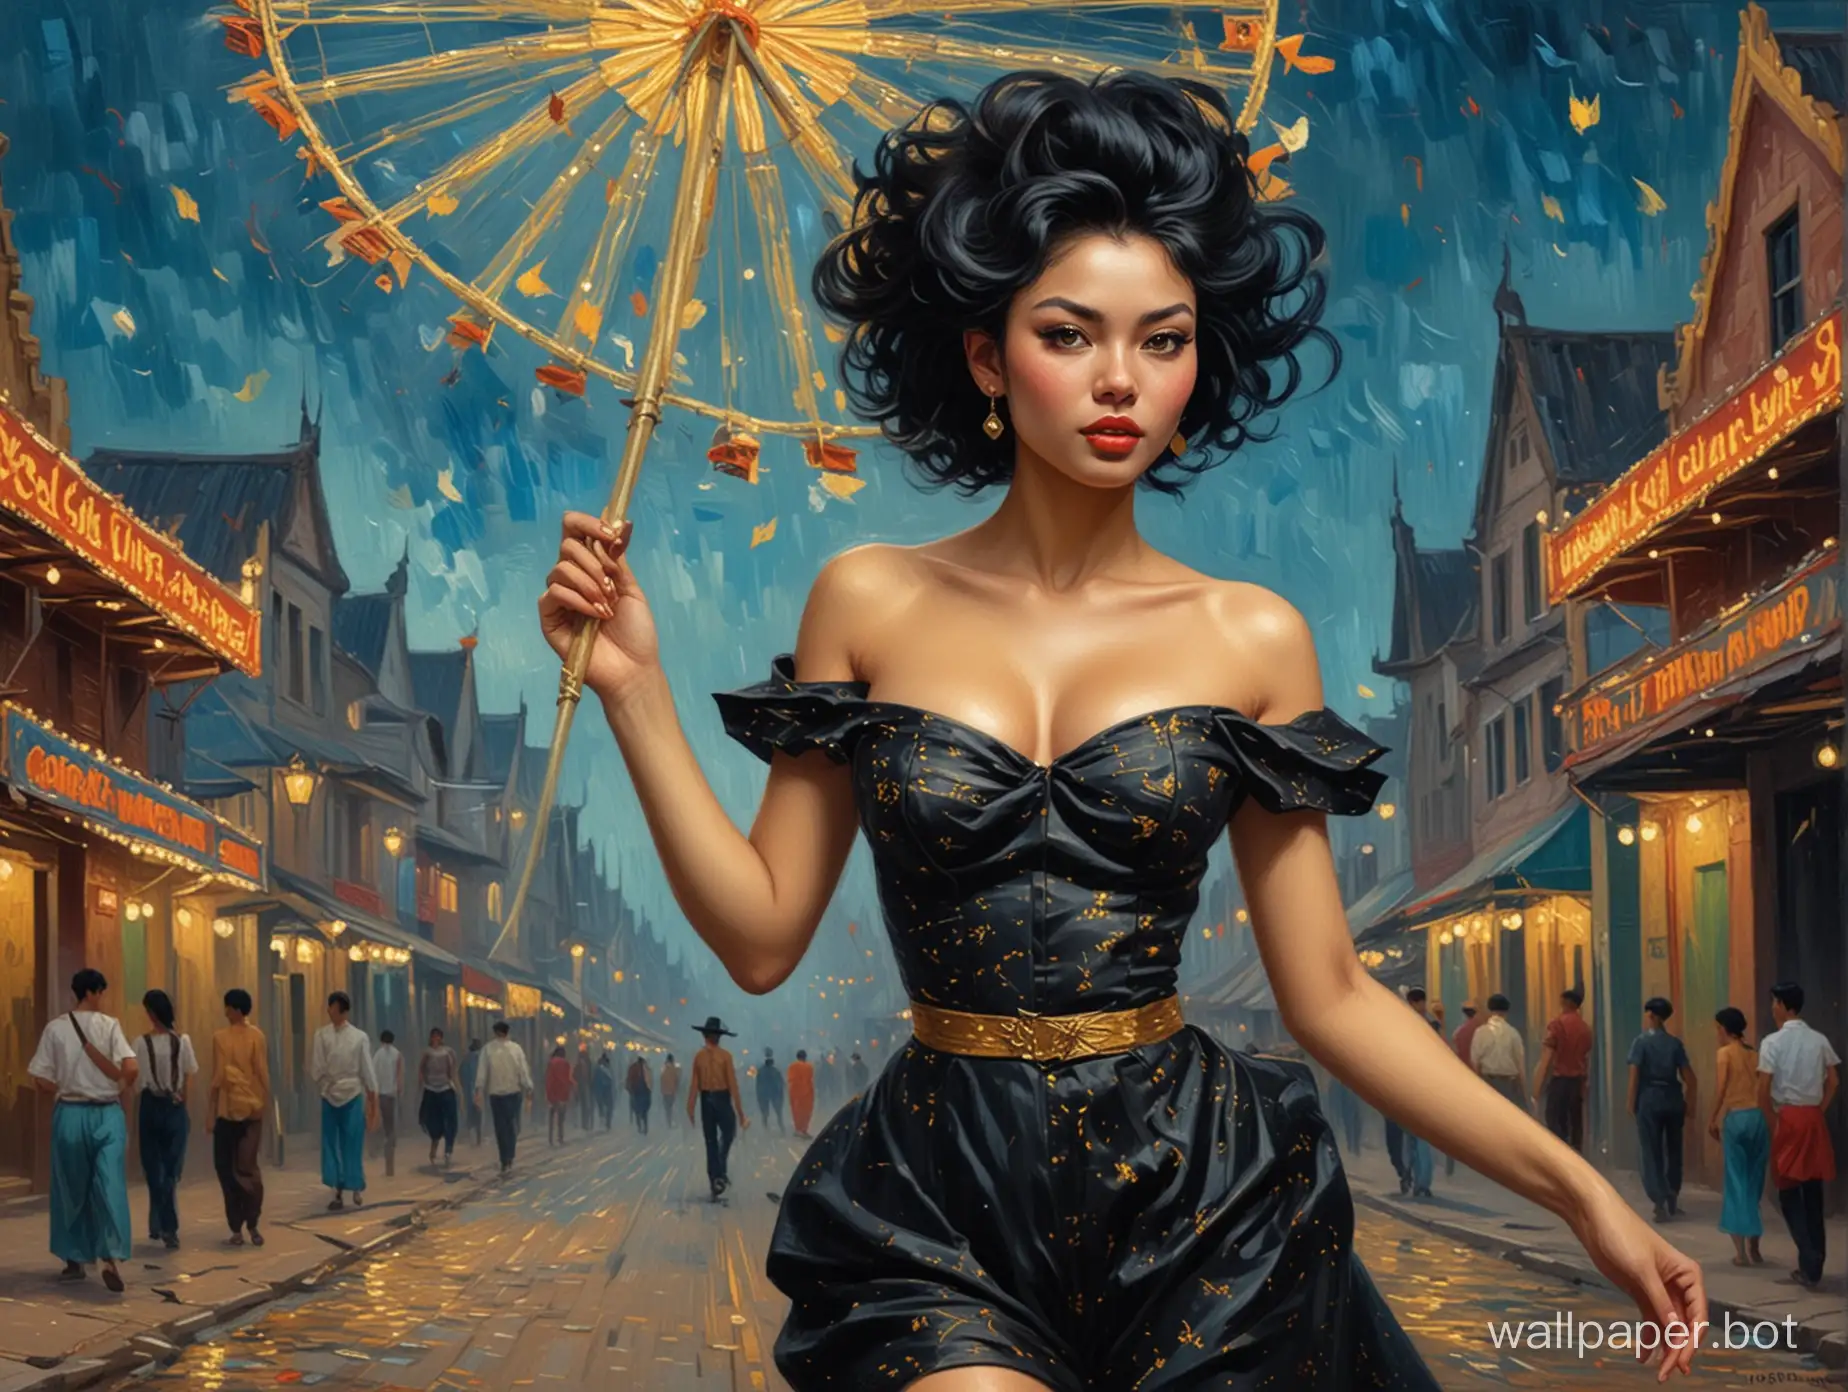 She is a Cambodian slot and slick as the cat with nothing on just her orbit walking on the wild side at the carnival, her wide hips and narowe waist line, black hair flying on the win, style of Vincent van Gogh romantic mood